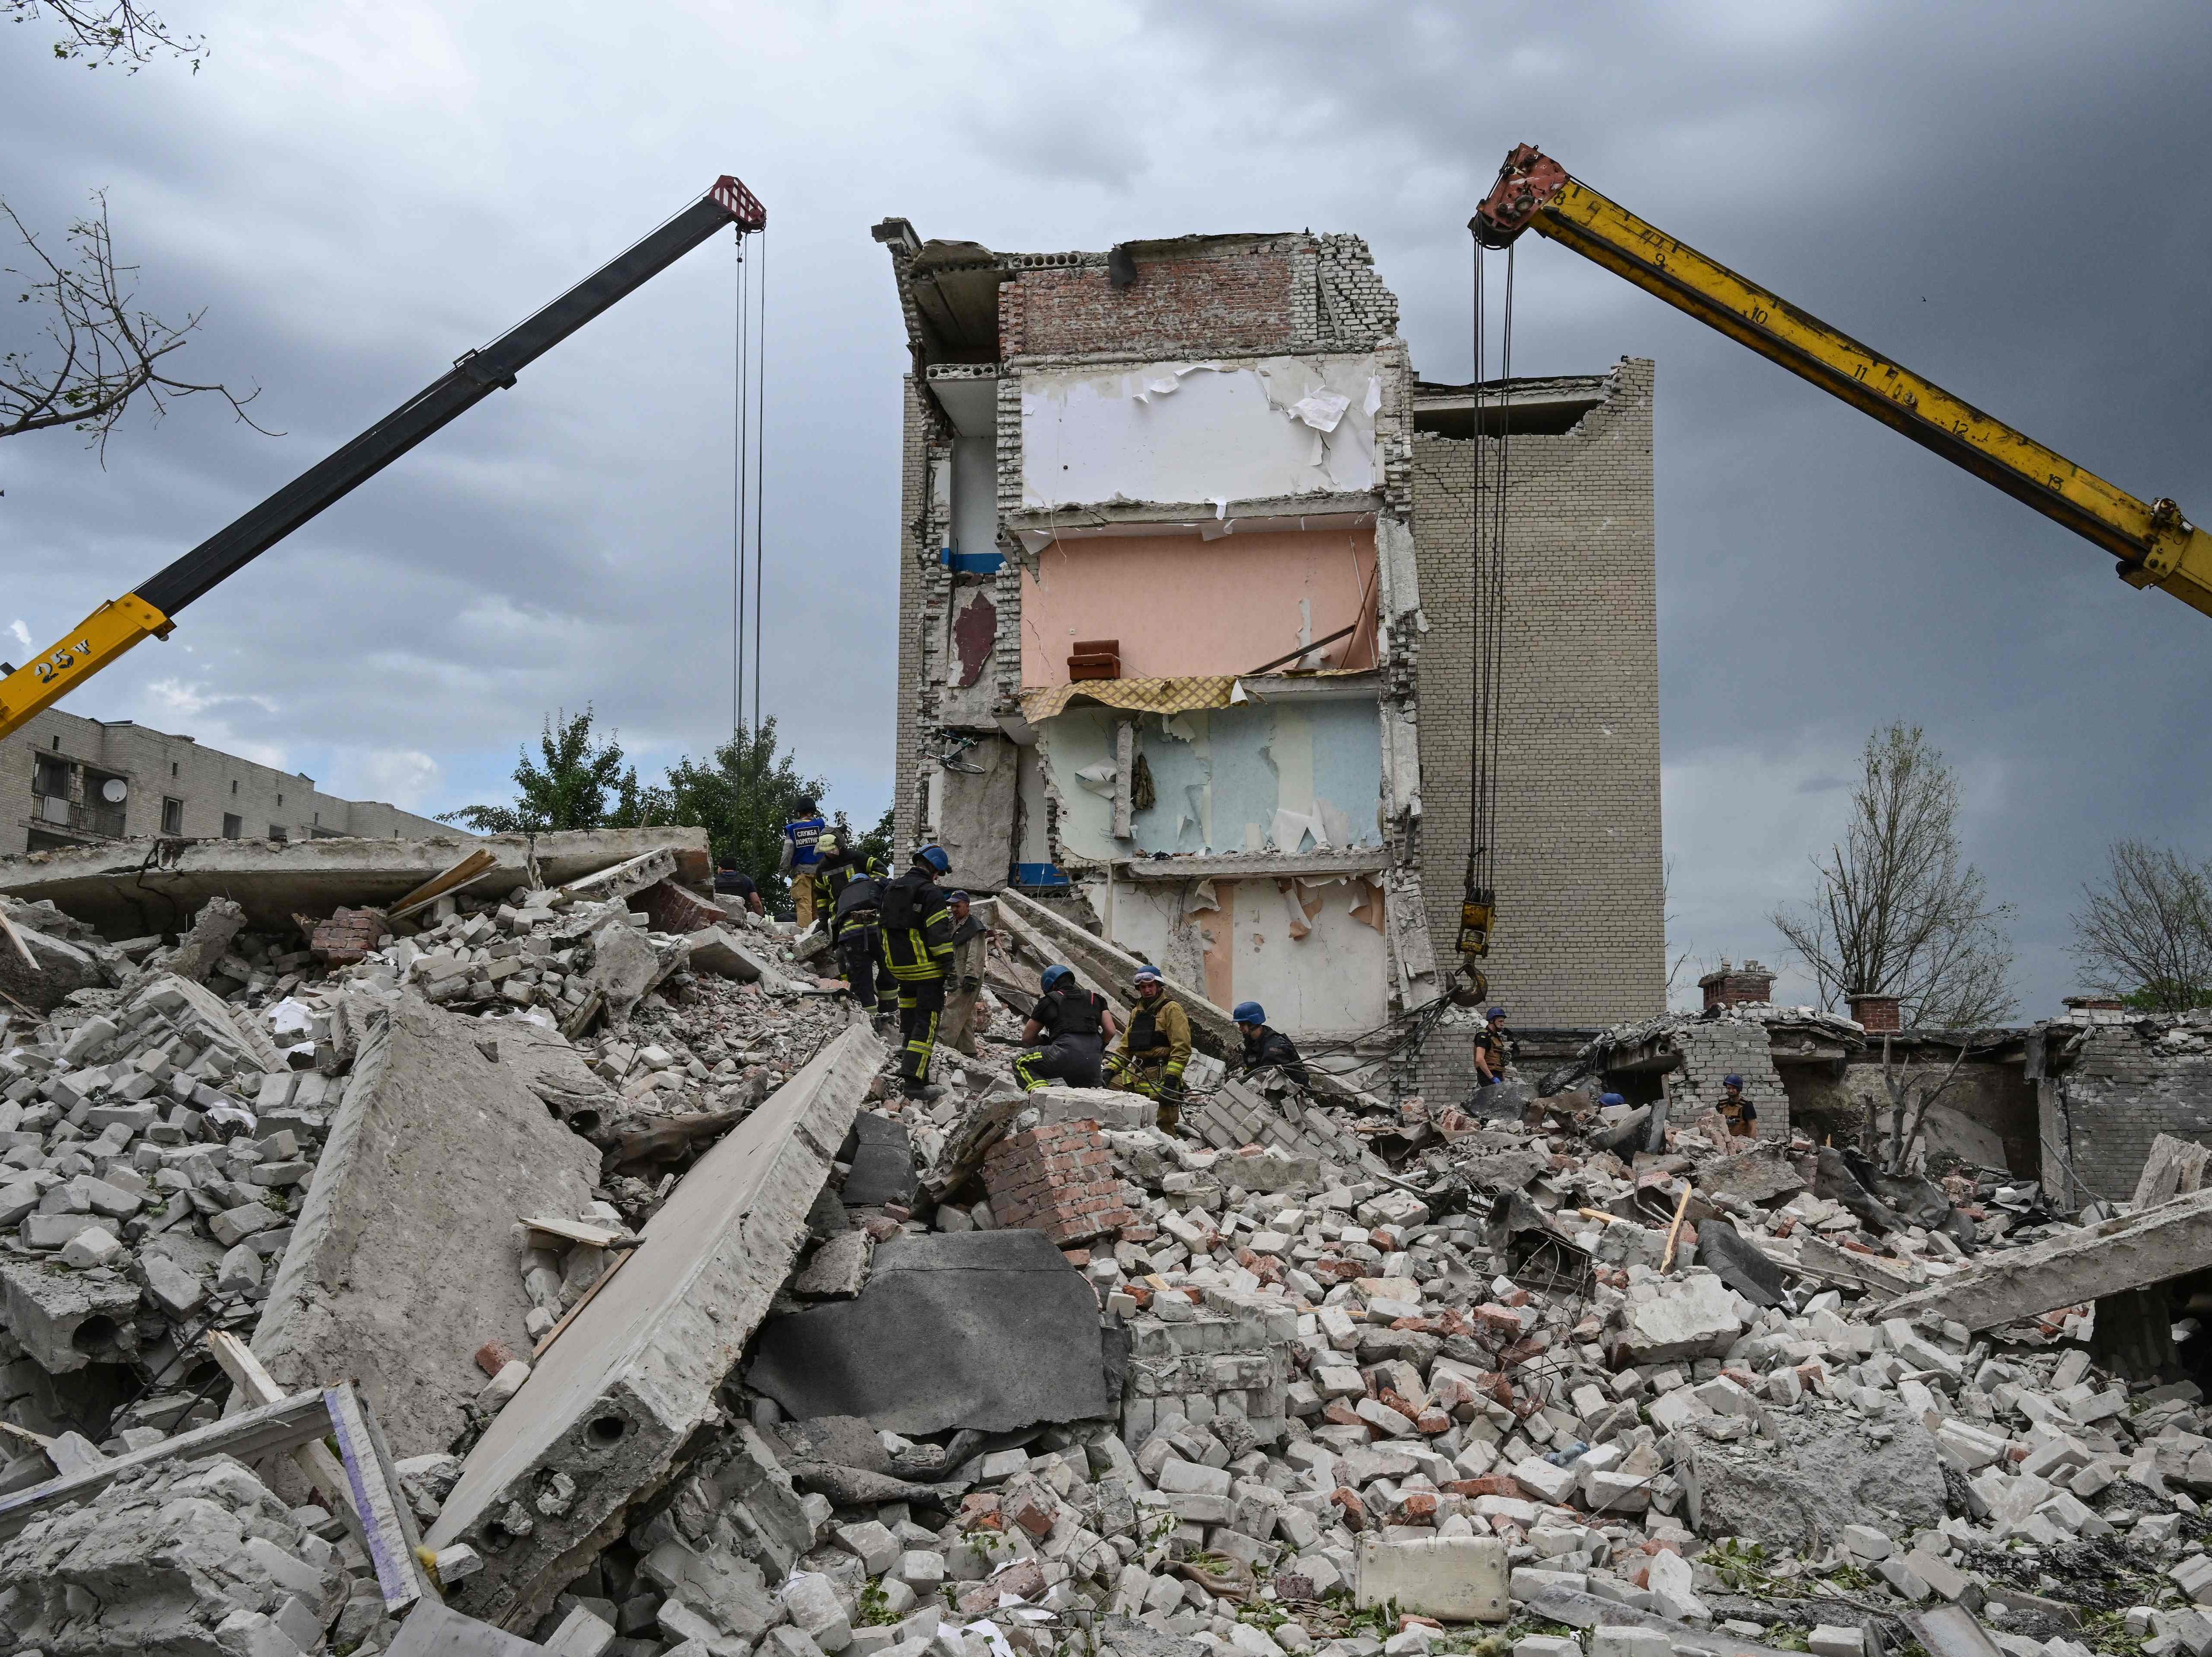 Rescuers clear the scene after a building was partially destroyed in an attack by Russian missiles in Chasiv Yar, in the Donetsk region of Ukraine